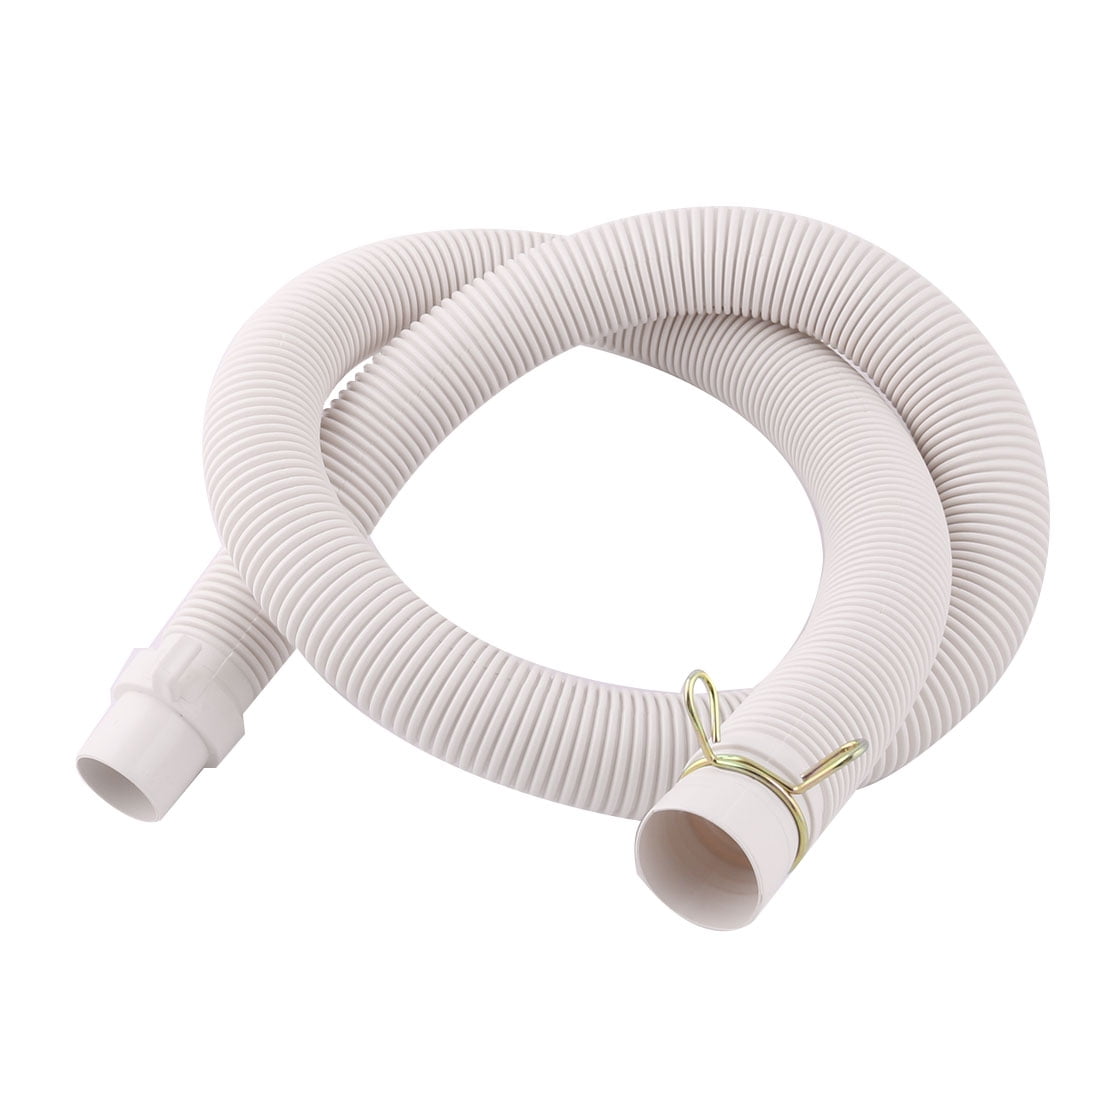 39ft Length Washing Machine Drain Discharge Hose Extension Kit Pipe Connector